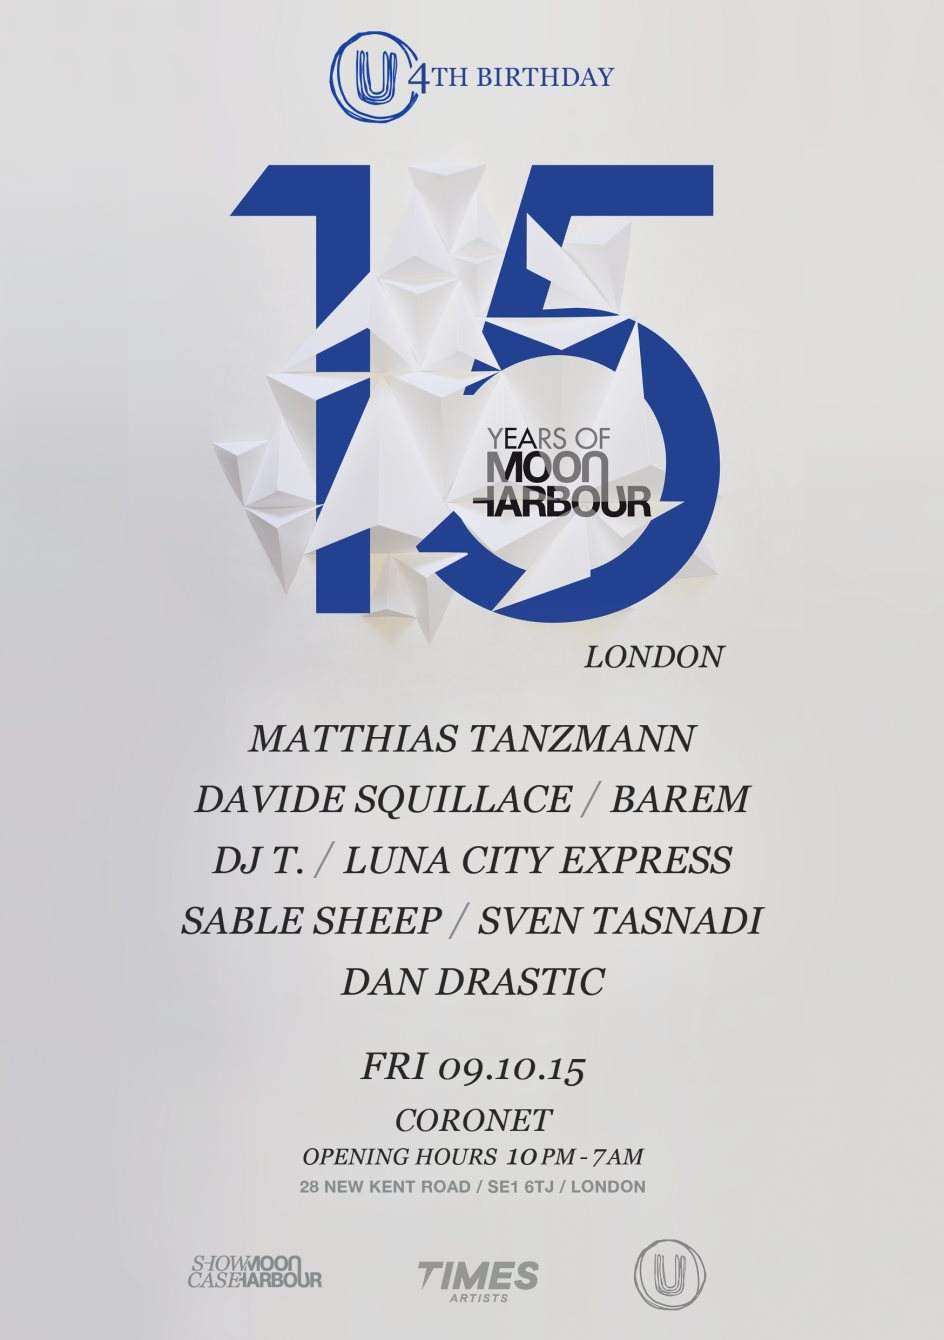 Unleash 4th Birthday x 15 Years of Moon Harbour with Matthias Tanzmann, Davide Squillace & More - Página frontal